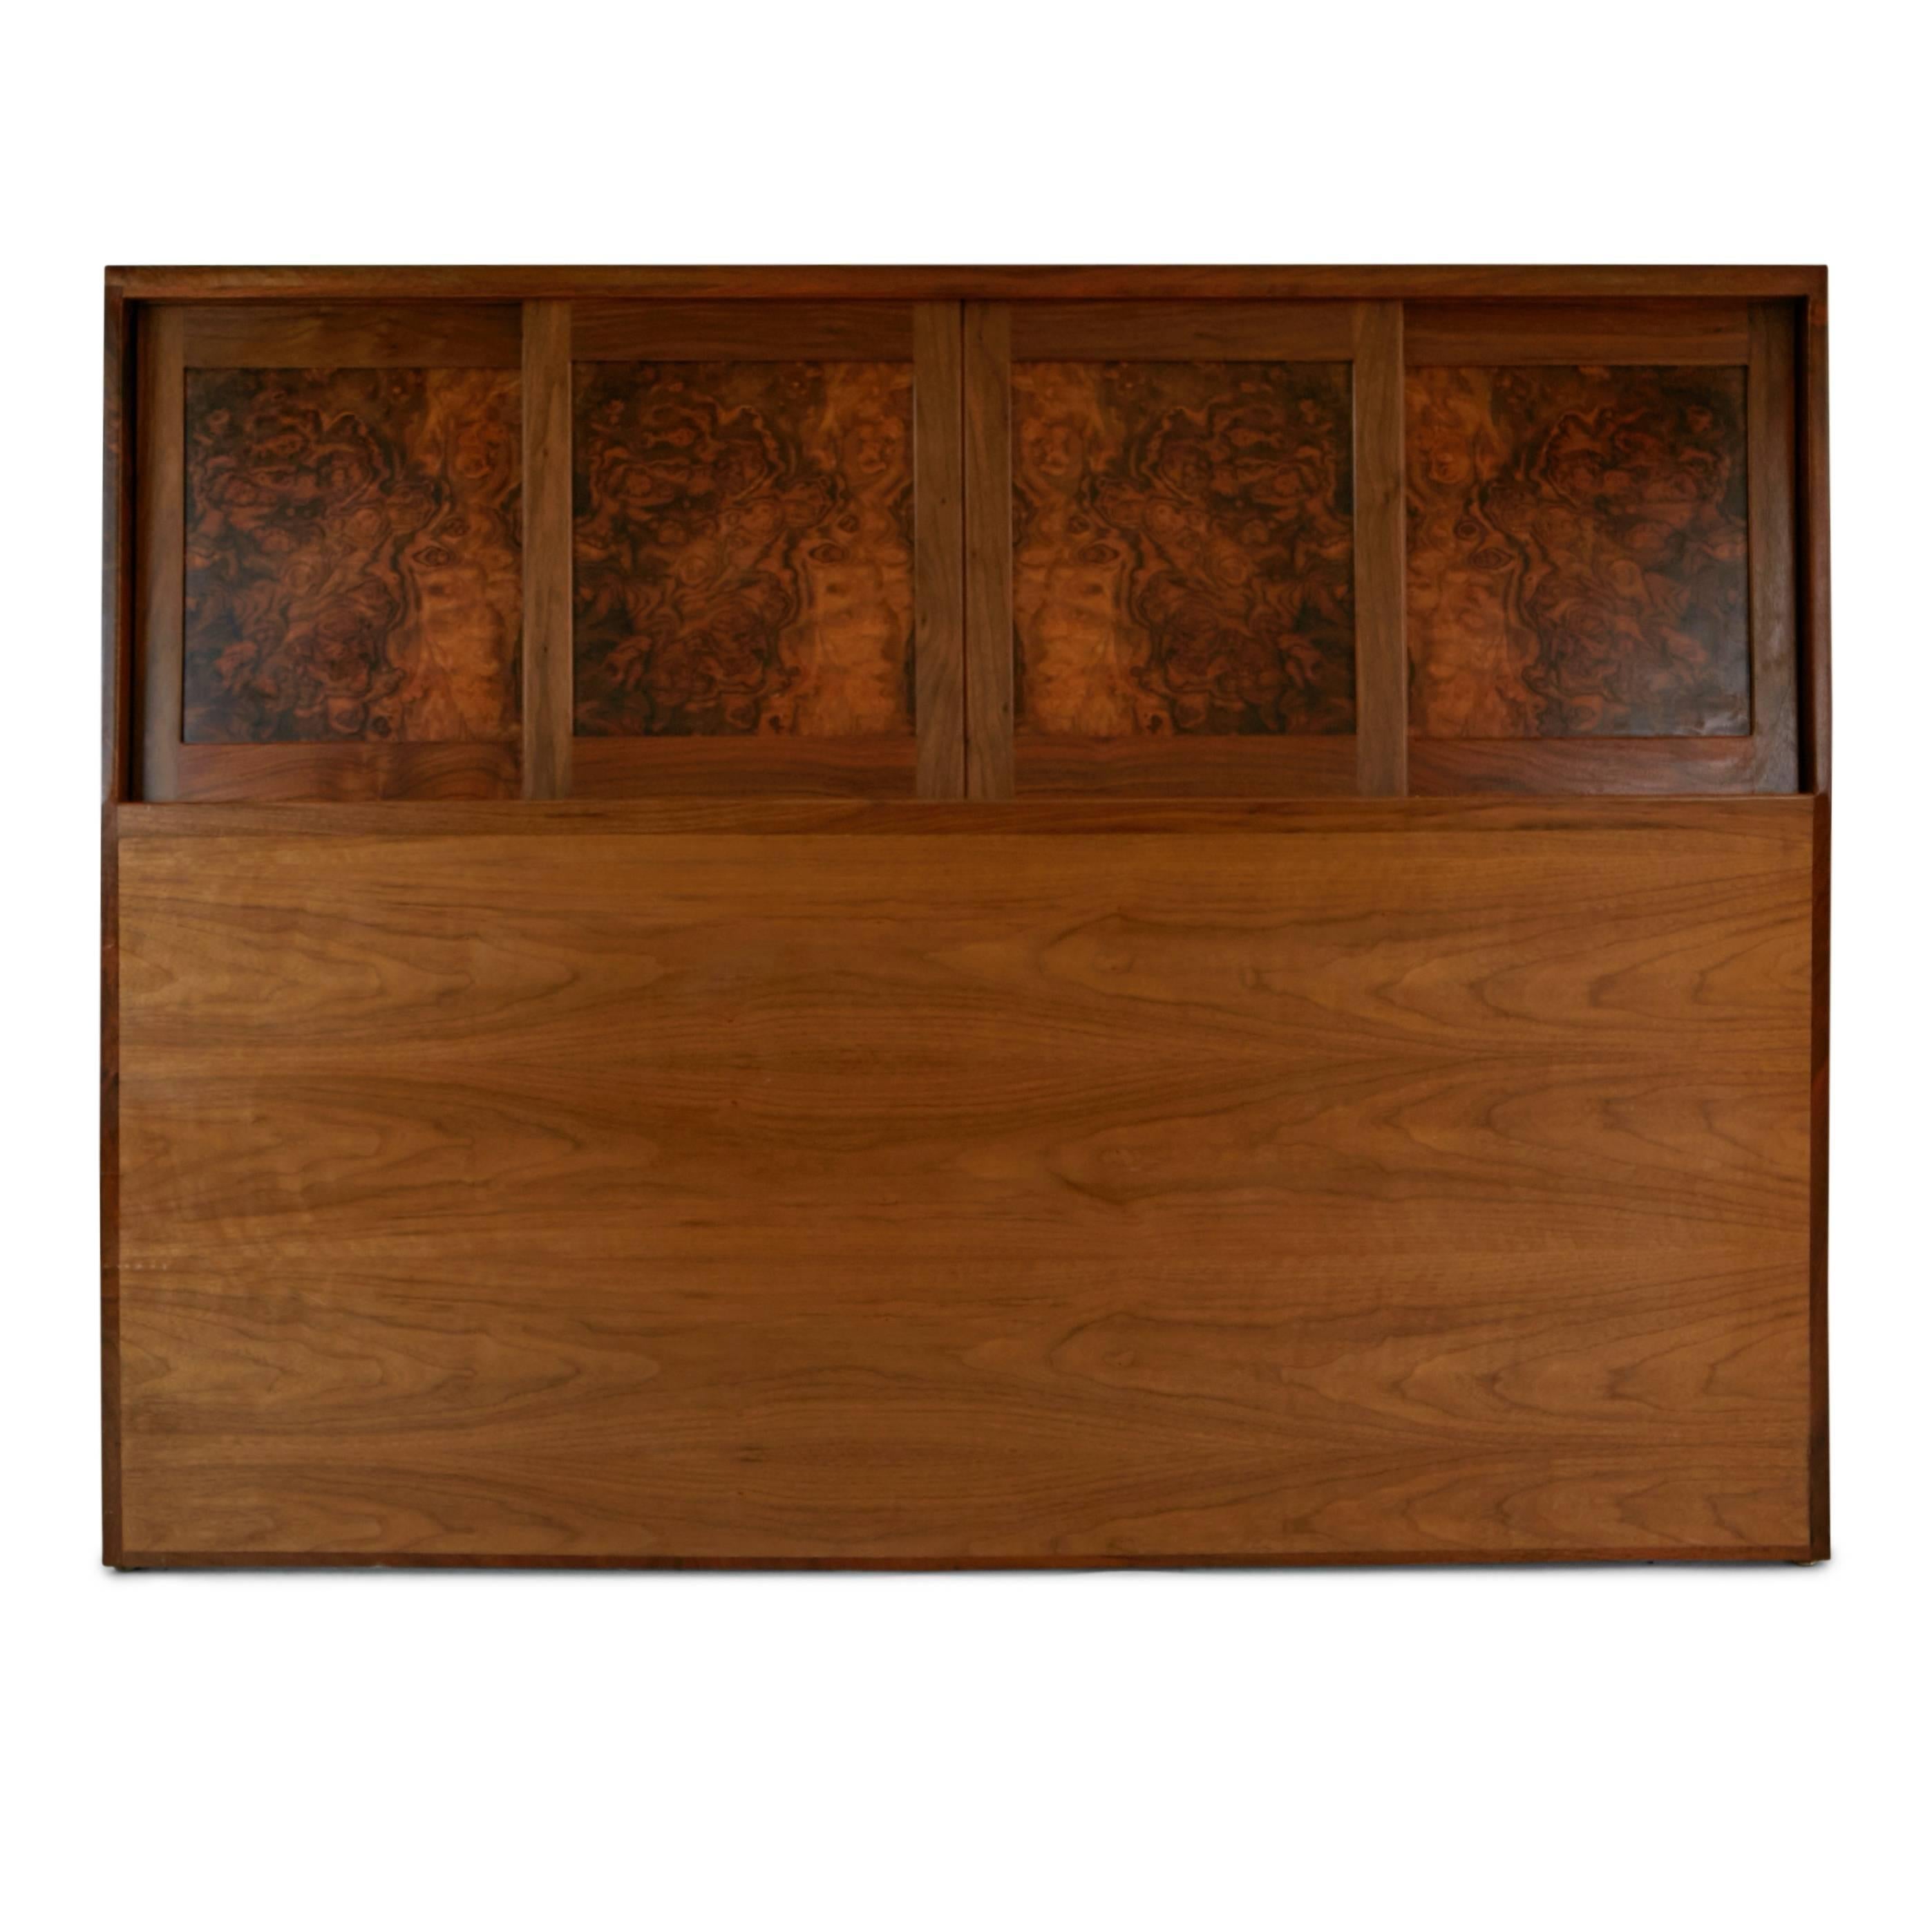 American Solid Walnut Craftsman Headboard by Ed Crowell, Signed and Dated 1975